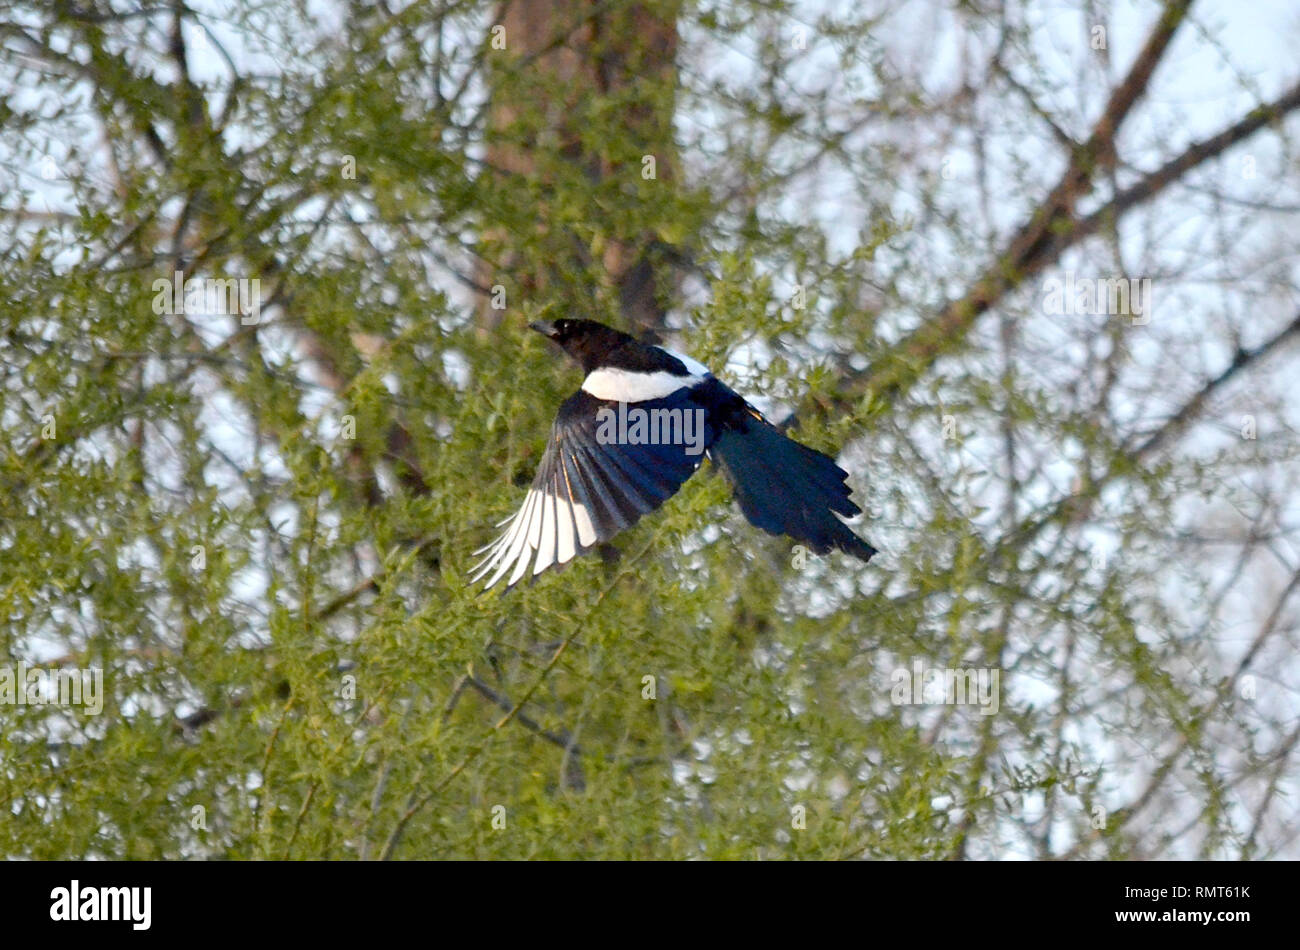 EURASIAN COMMON MAGPIE PICA PICA BIRD FLYING MID AIR SOARING AMONG TREES IN NATURE Stock Photo